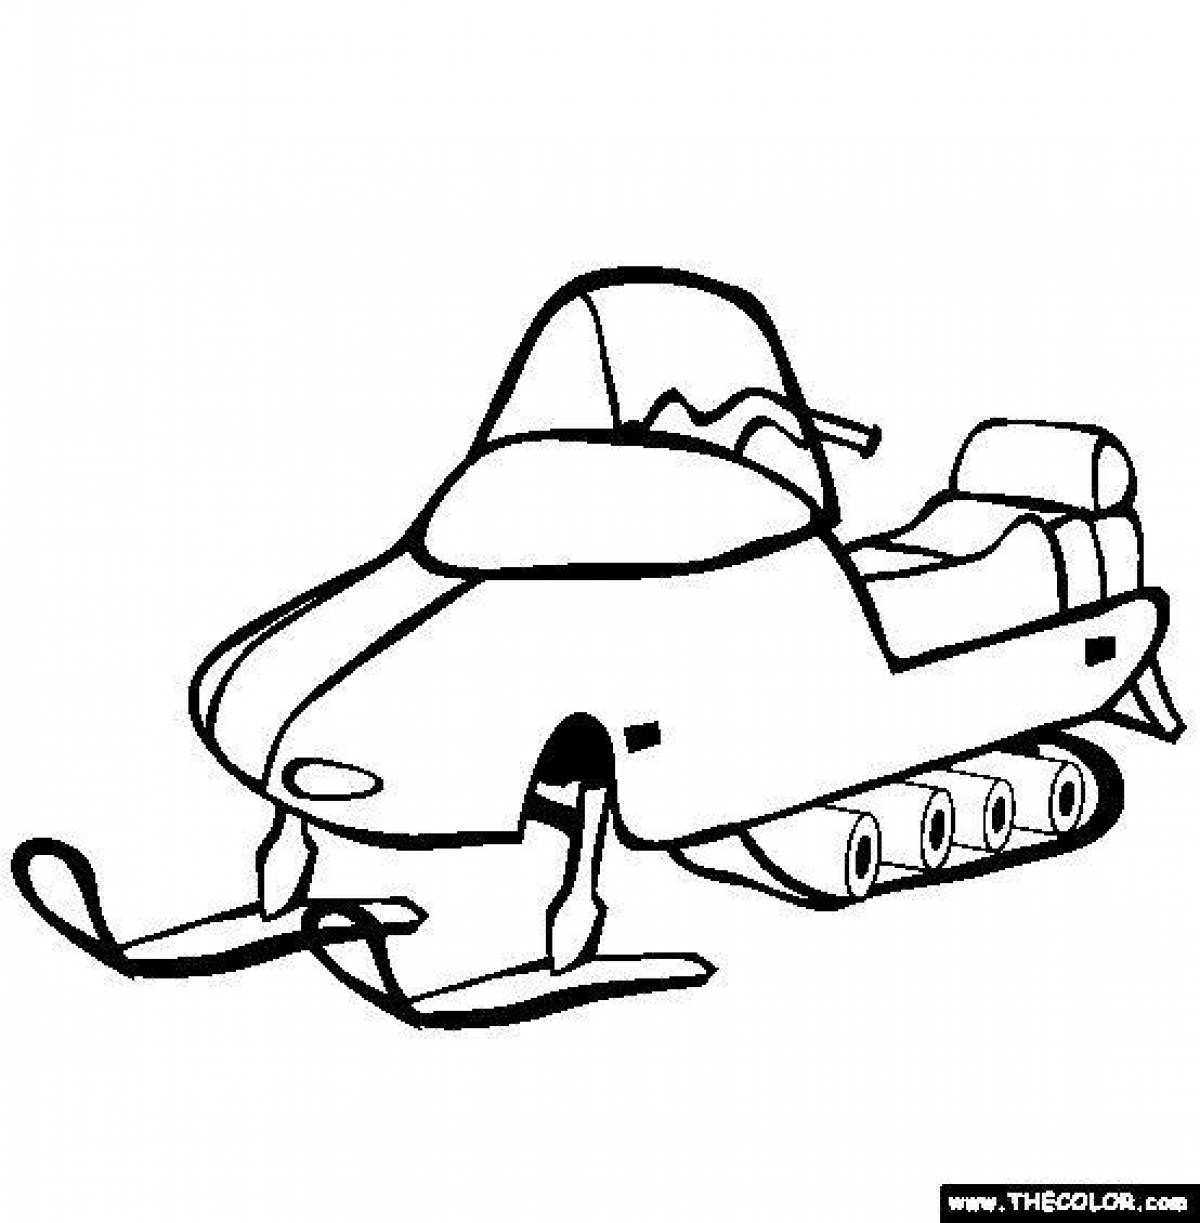 Shiny snowmobile coloring page